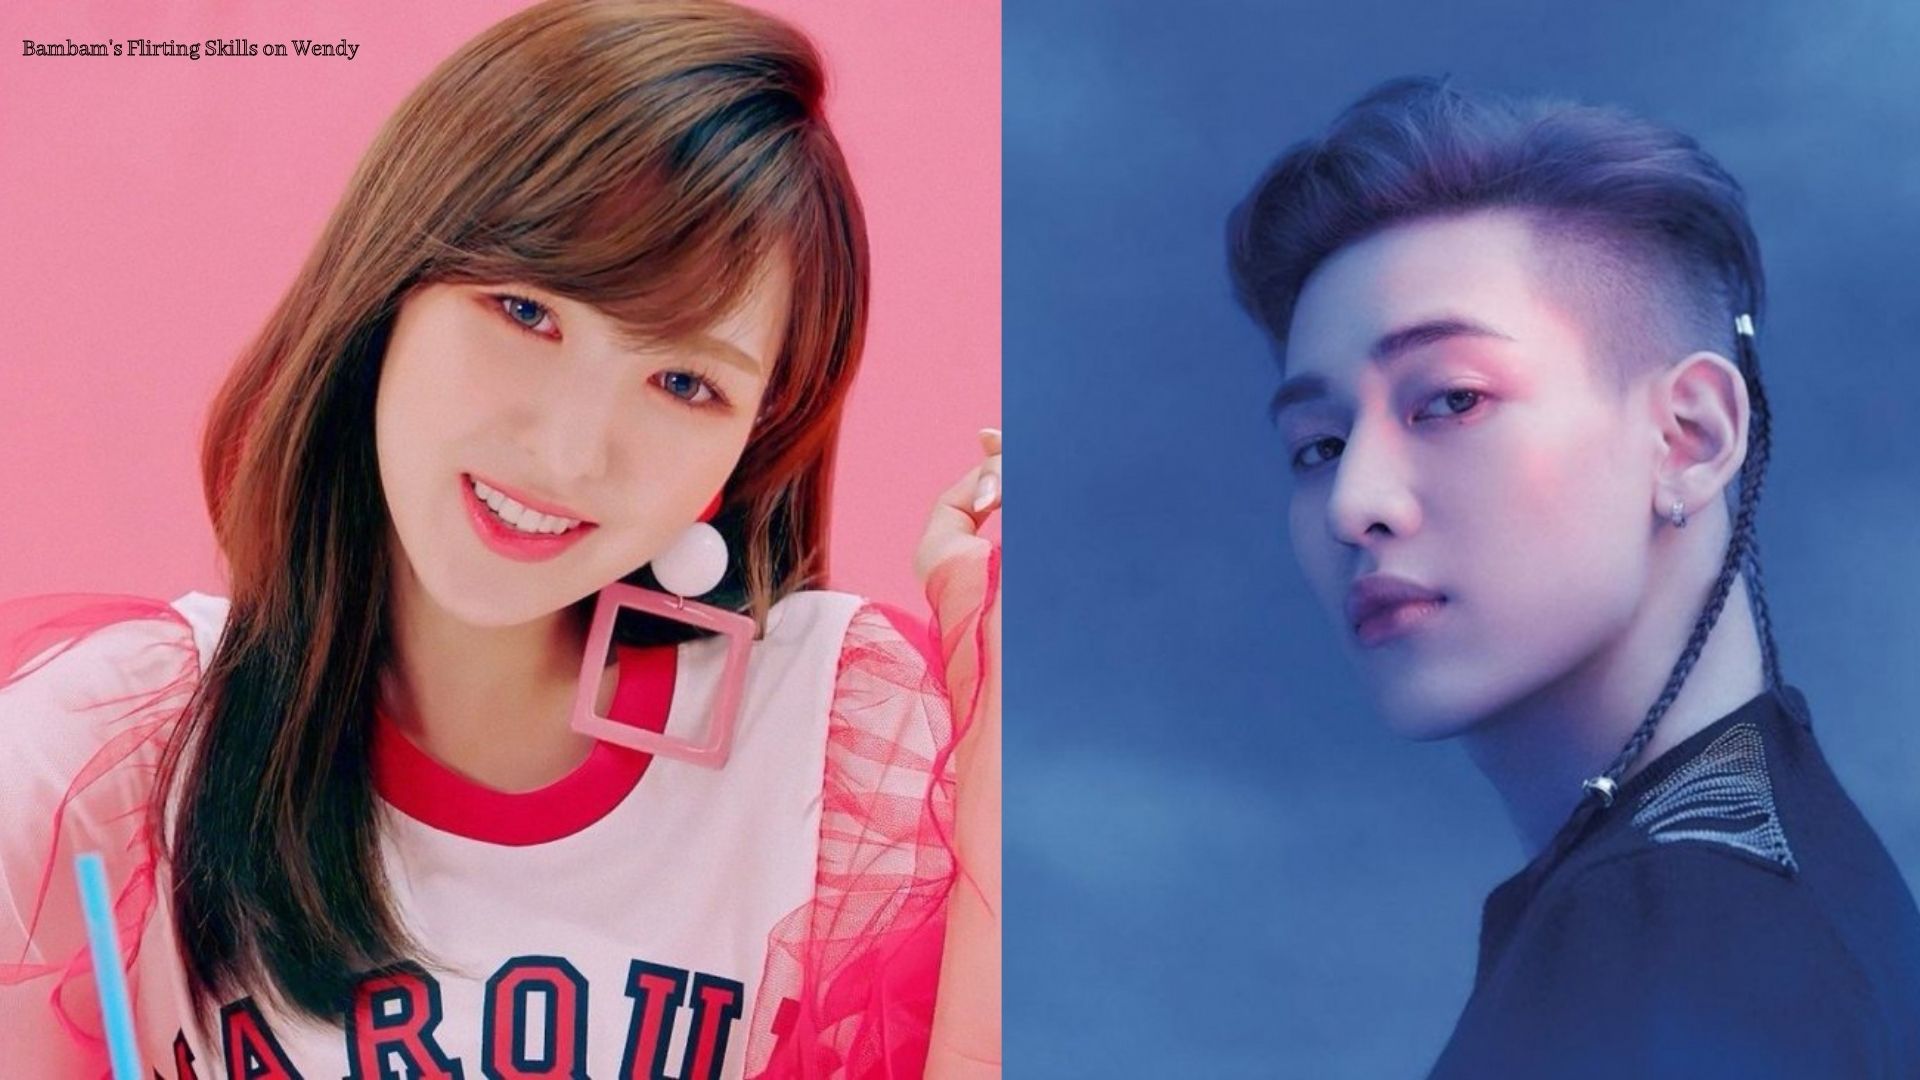 Bambam & Wendy – The Got7 Member Is Back with His Top-Notch Flirting Skills